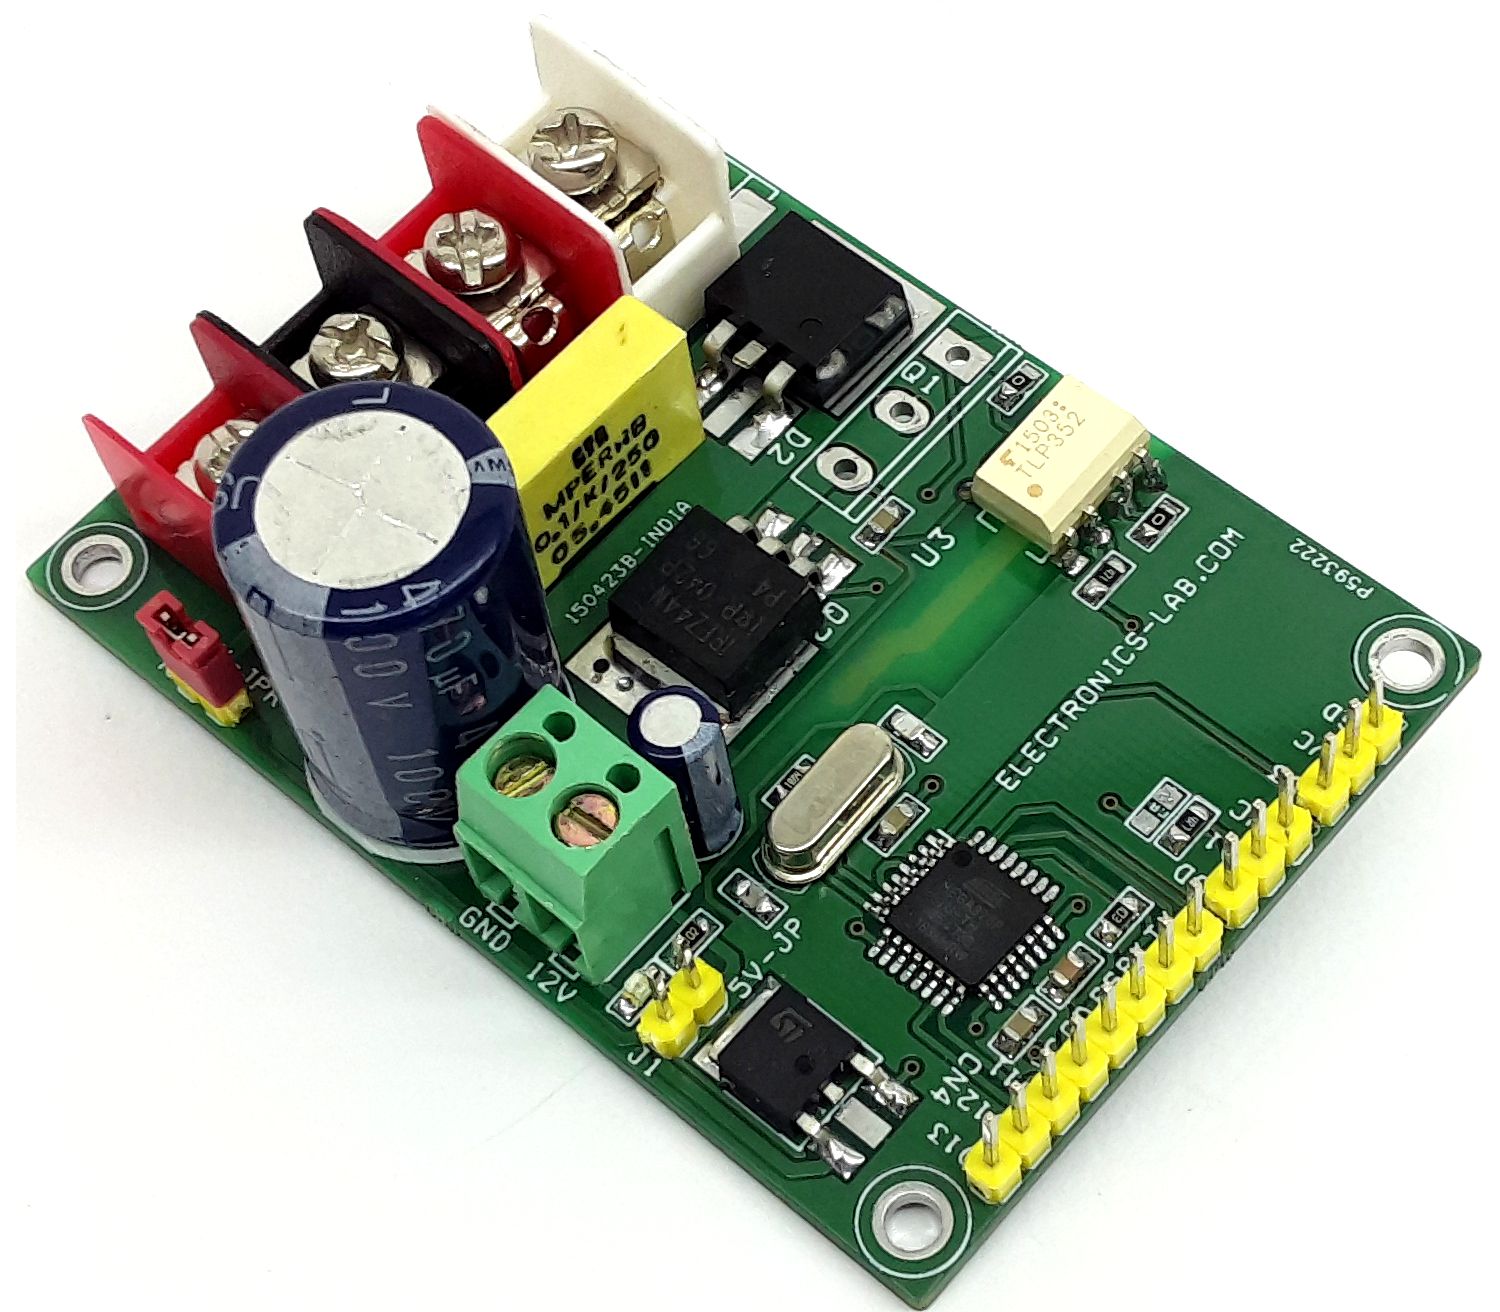 home automation - Link to an project for remotely turning off light switch?  - Arduino Stack Exchange